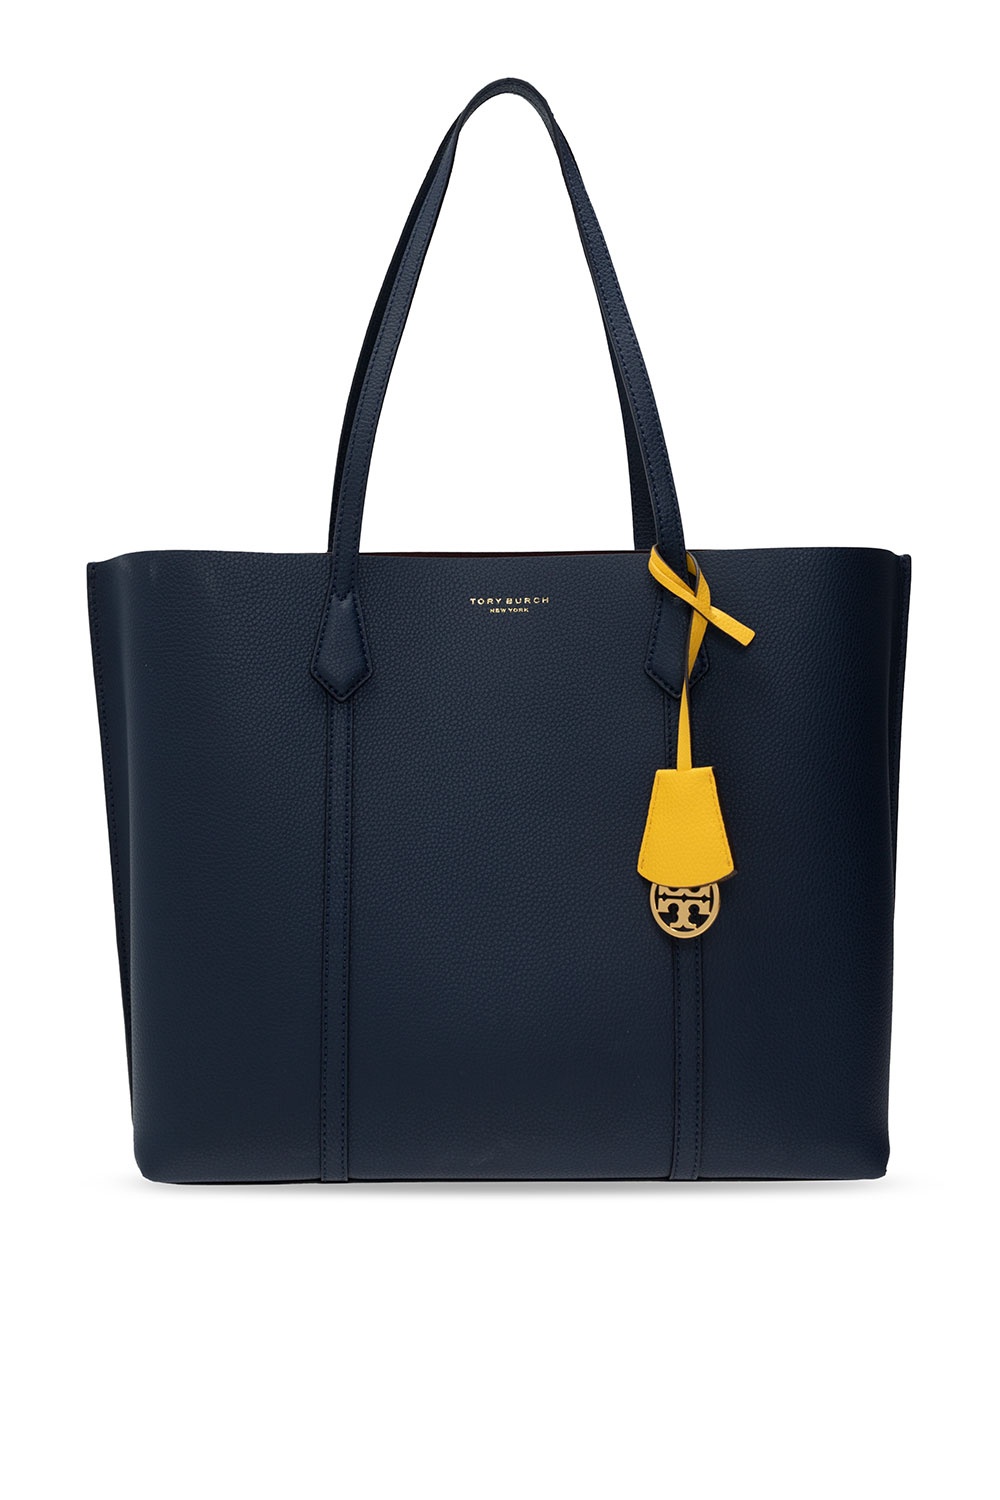 Tory Burch Perry Triple-compartment Tote in Blue